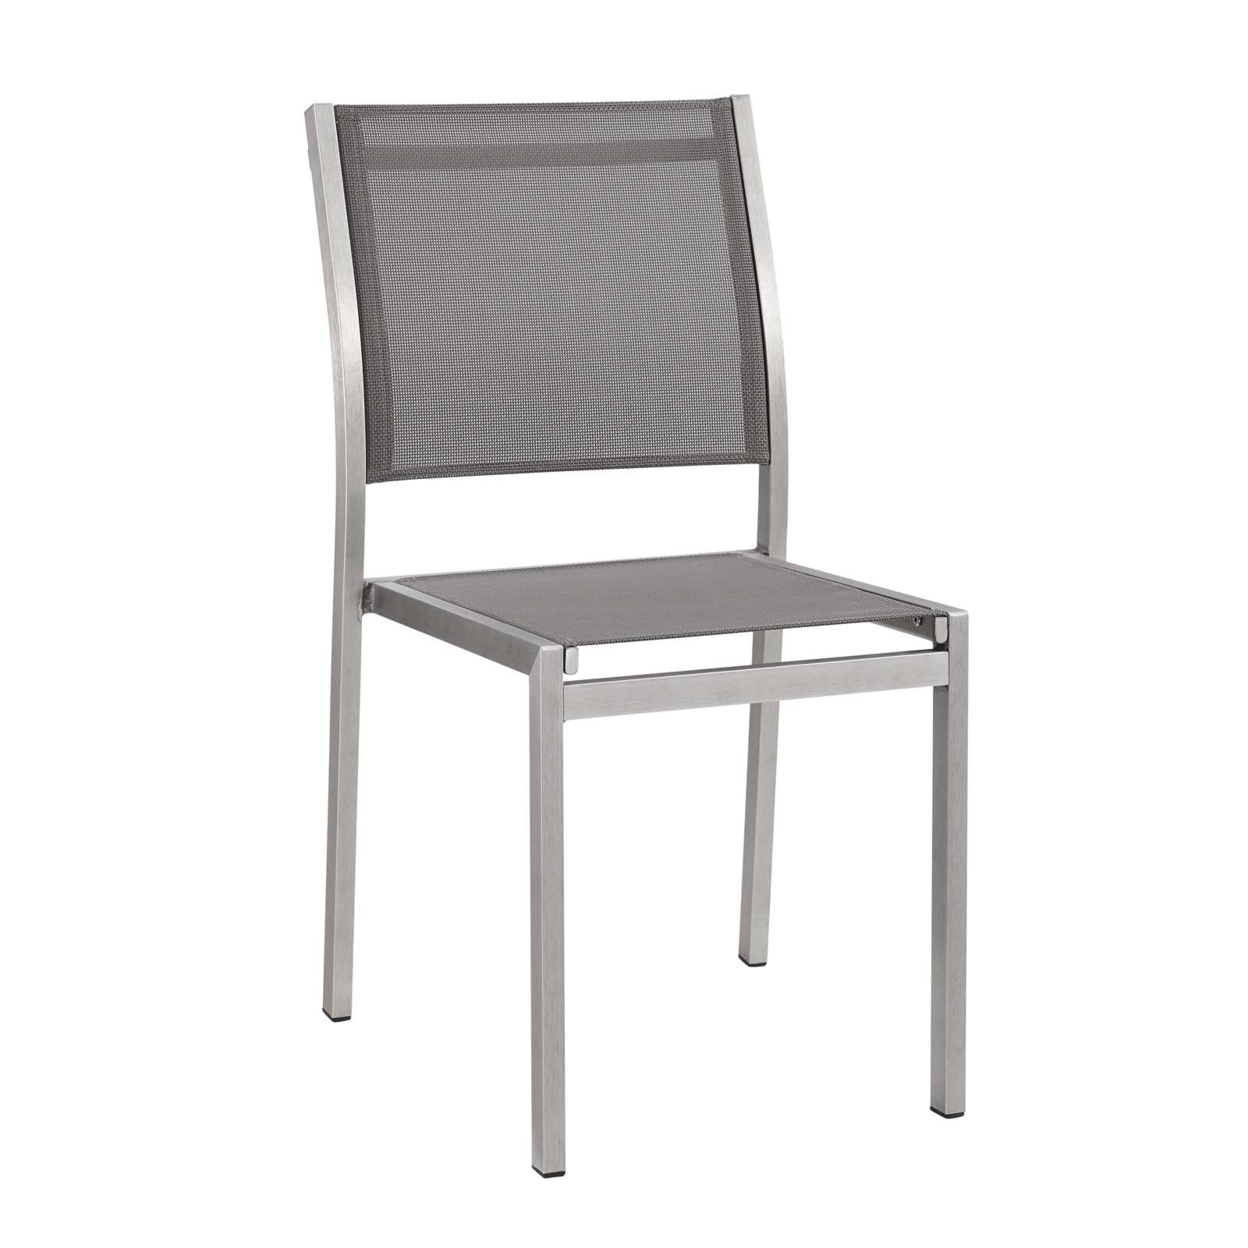 Modway Shore Fabric and Aluminum Outdoor Patio Dining Side Chair in Silver/Gray - image 1 of 4